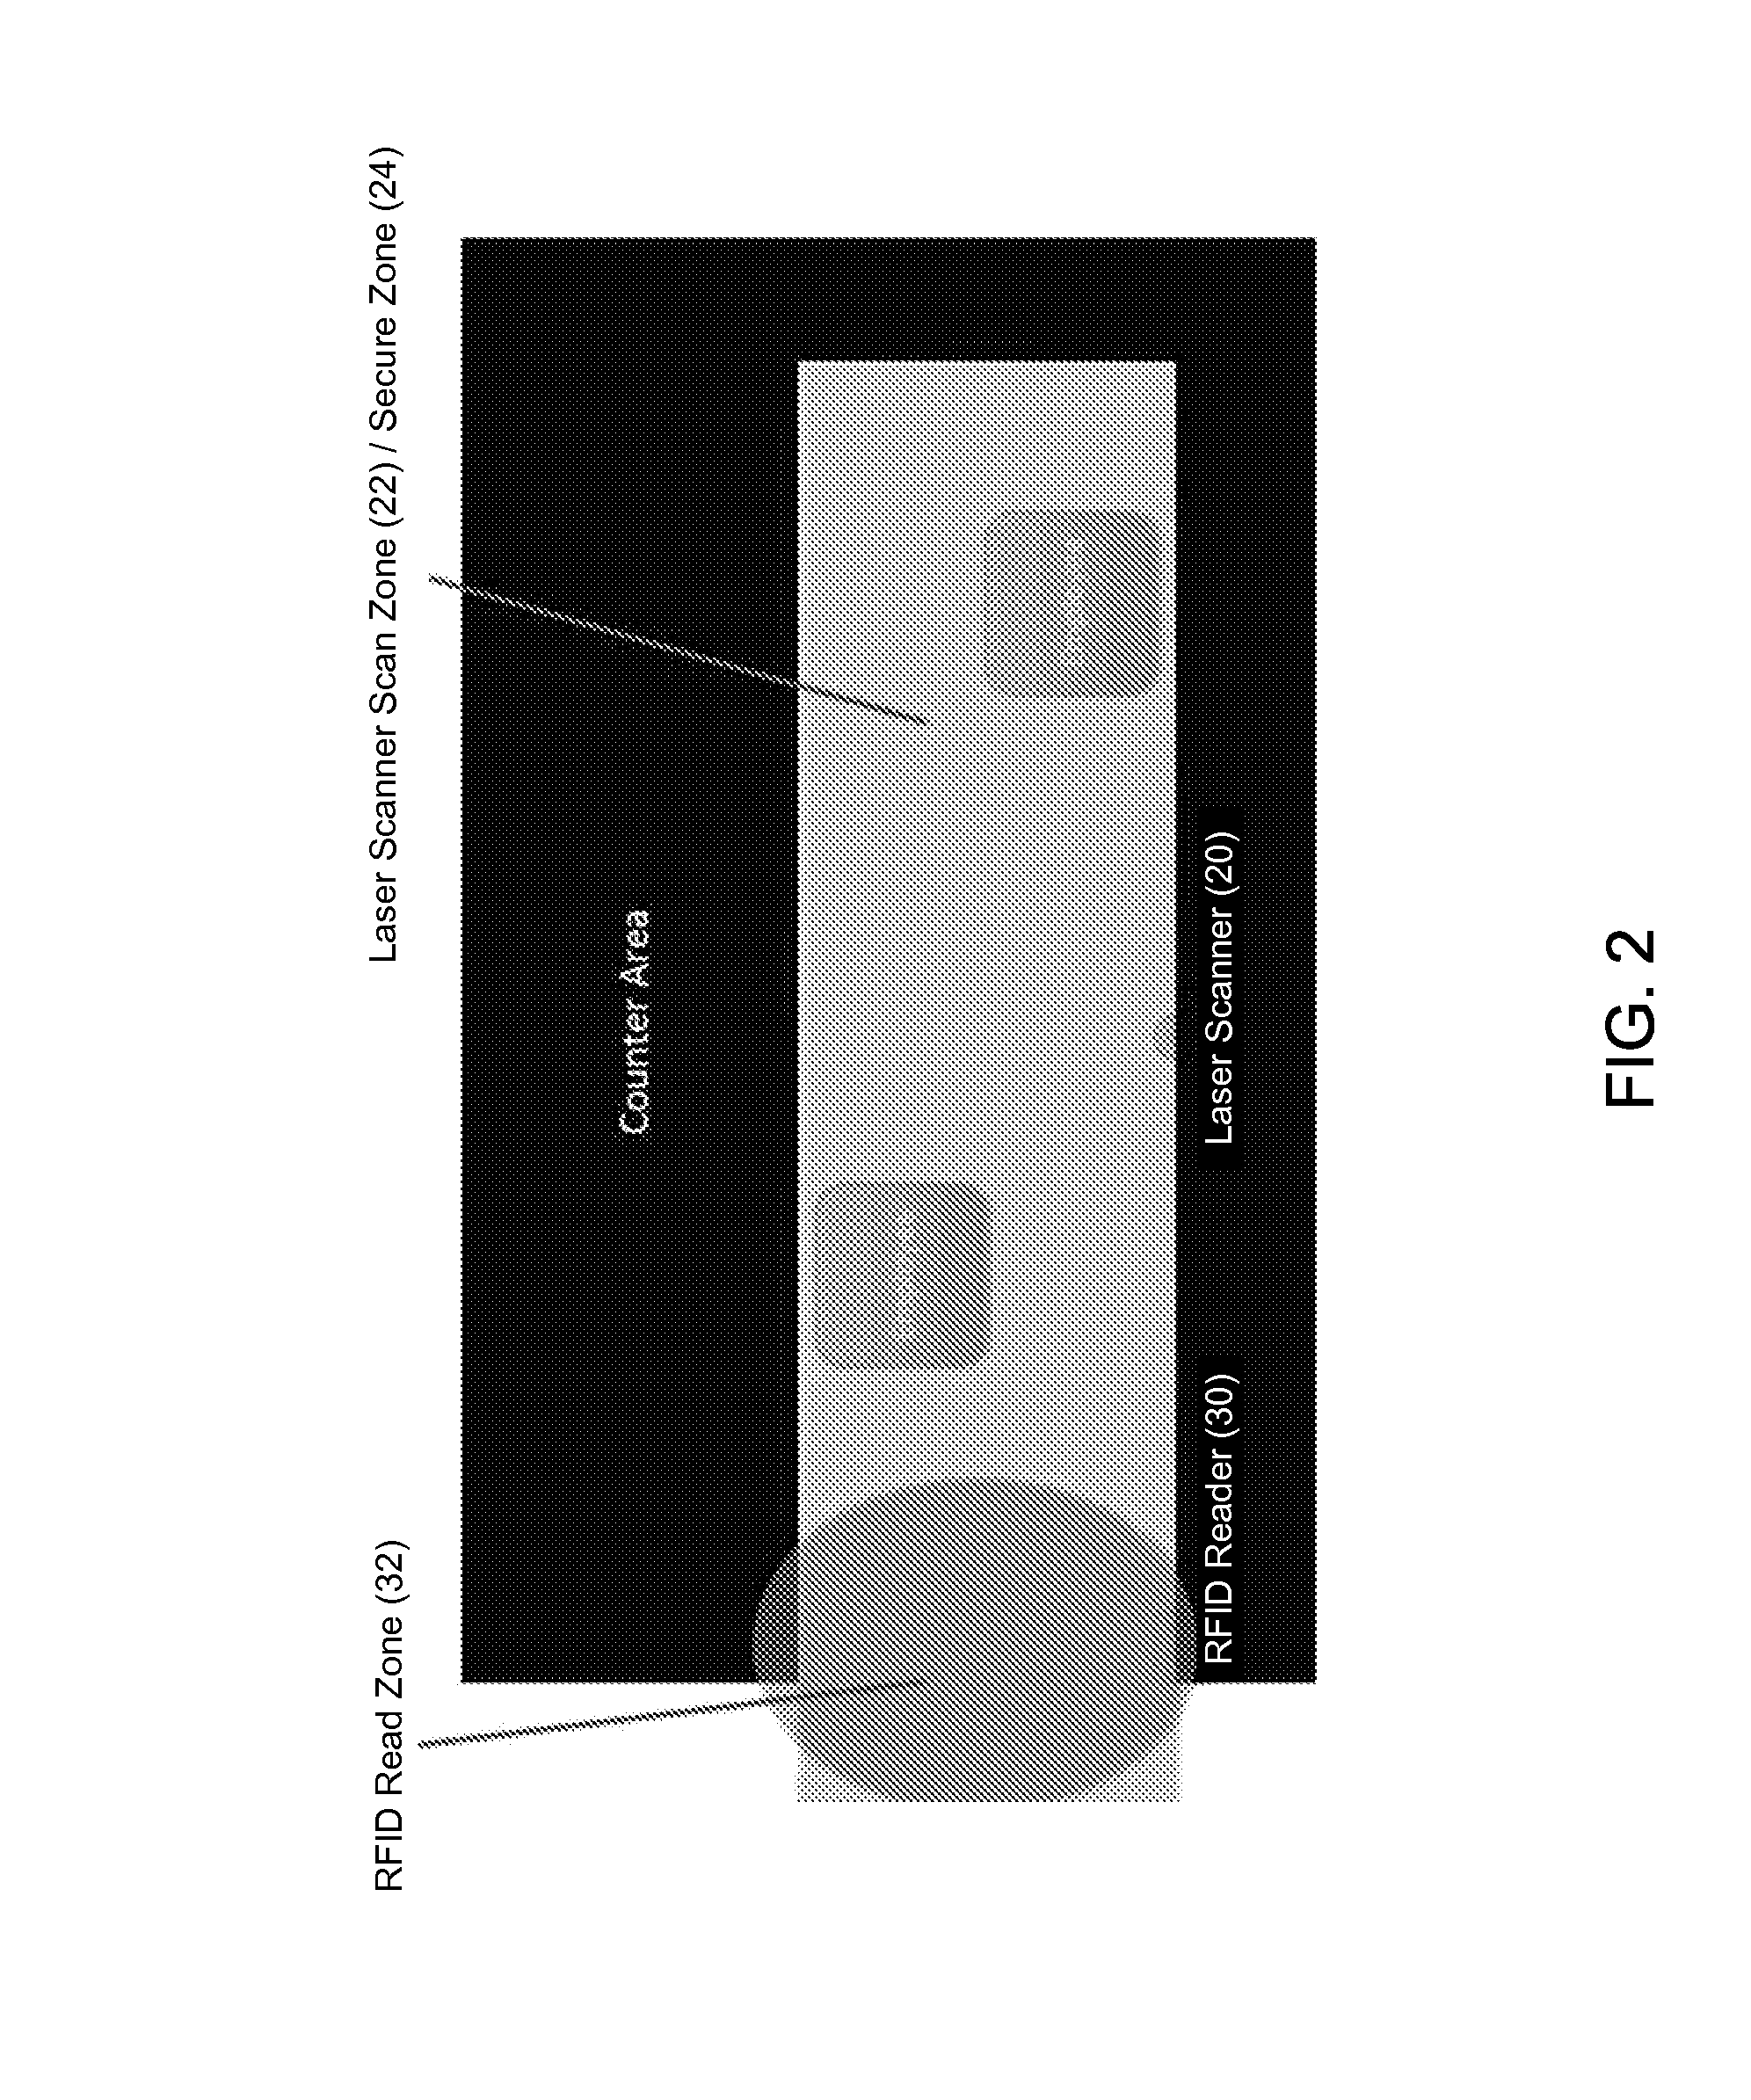 Theft prevention system and method